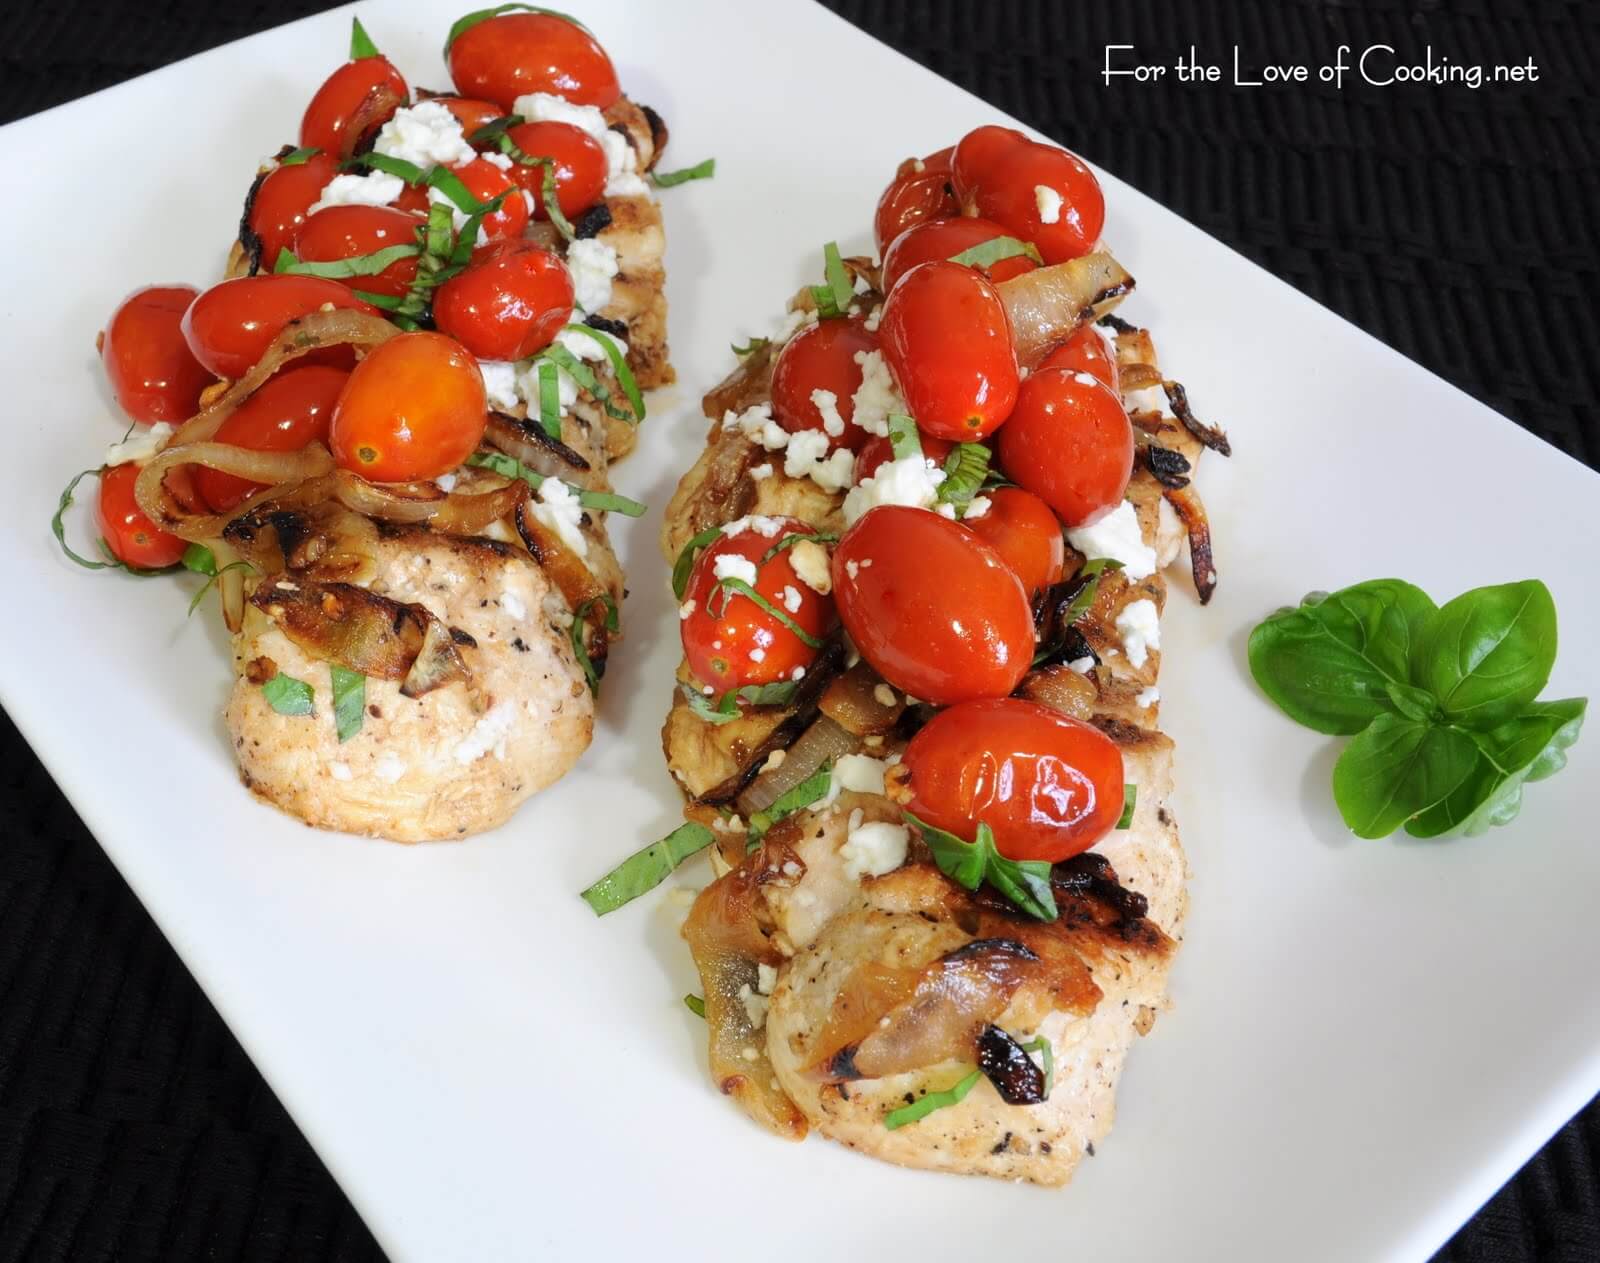 Chicken Breasts with Tomatoes, Caramelized Onions, and Feta Cheese